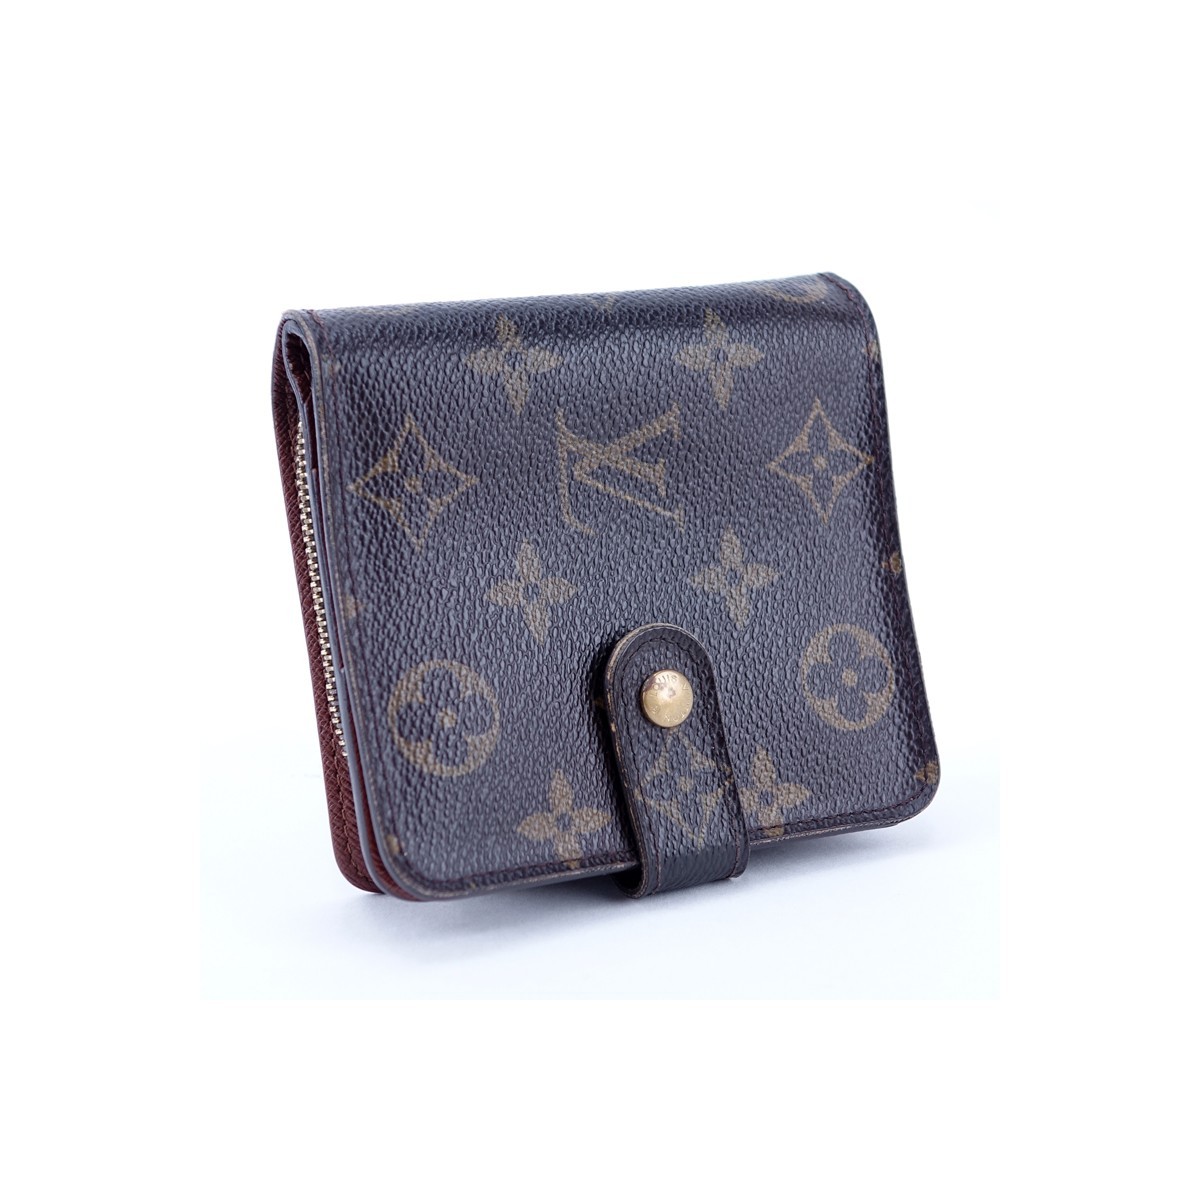 Louis Vuitton Brown Monogram Coated Canvas Compact Zip Wallet. Golden brass hardware, brown interior with zipper and slot pockets.